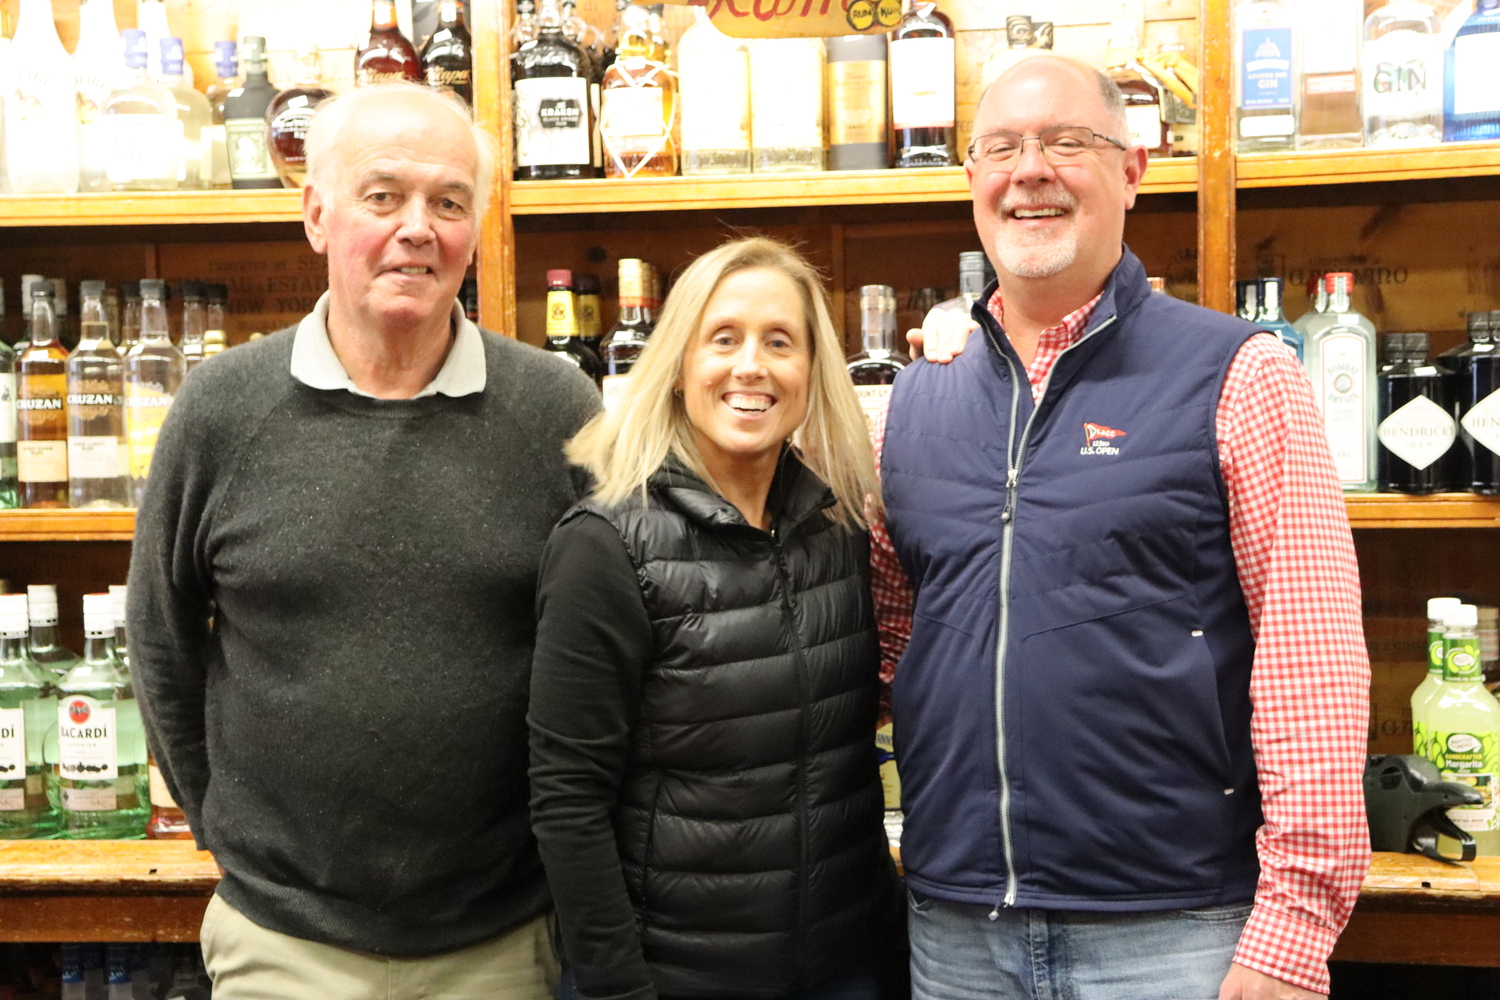 From left, John Rist, Michelle Reilly and John Noonan. The three business partners operate Herbert and Rist Liquor Store, celebrating its 90th anniversary this year. CAILIN RILEY